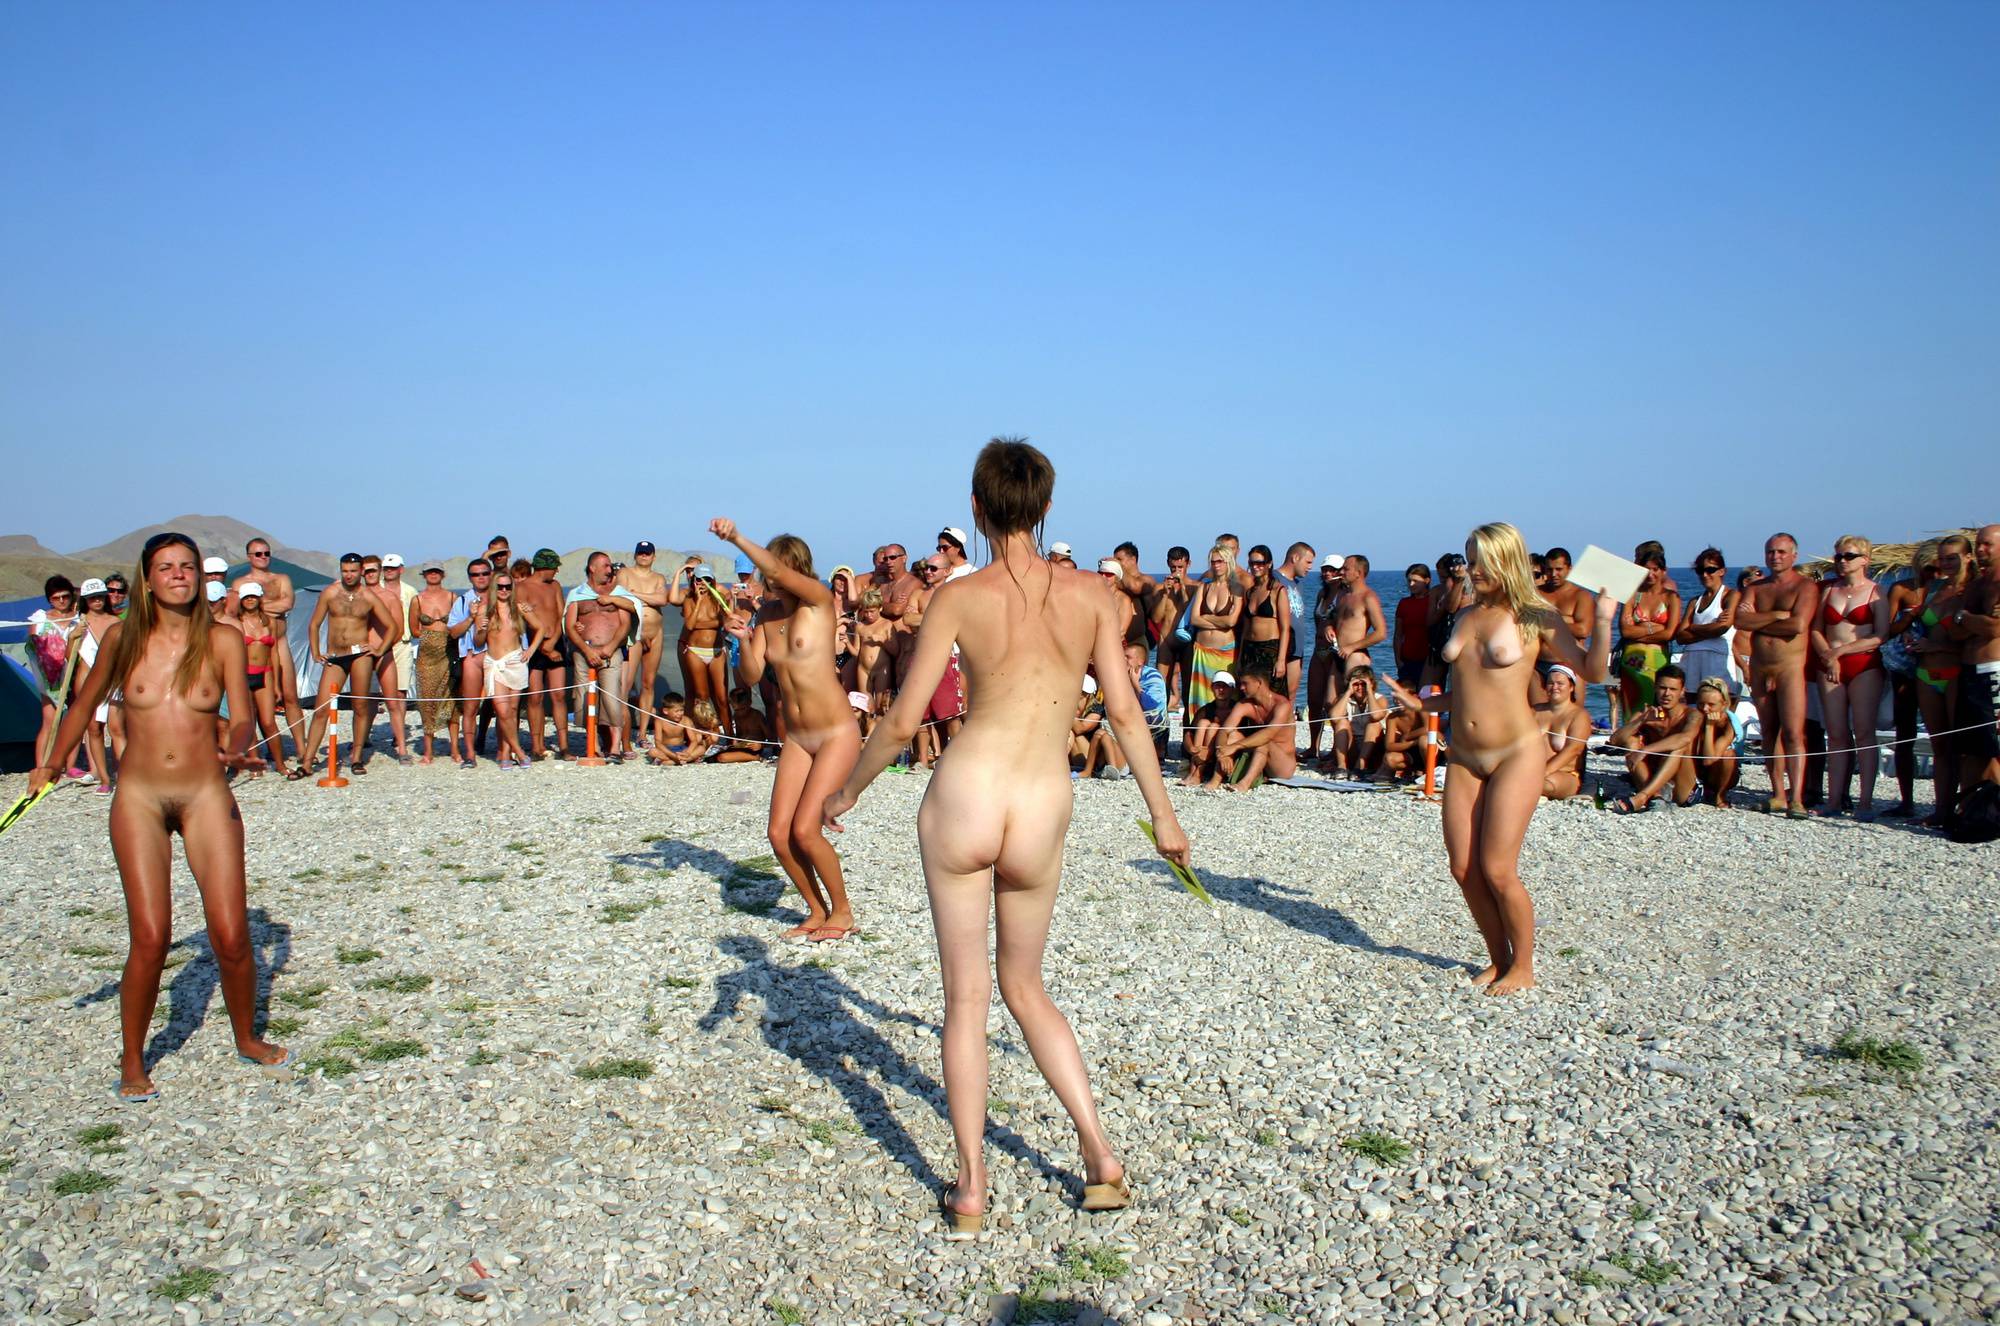 Pure Nudism Images Pageant Walk and a Dance - 4